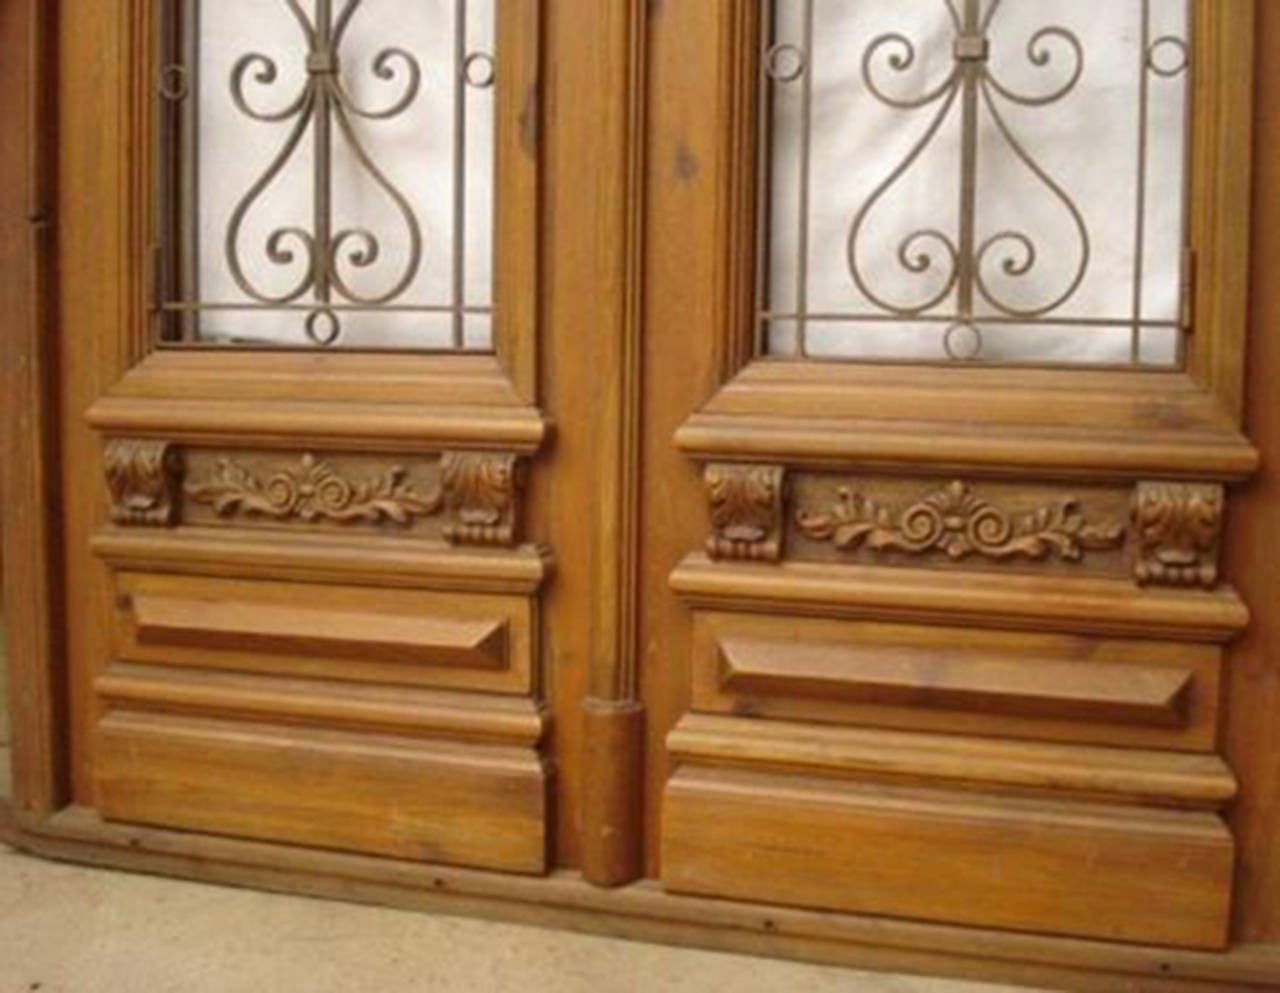 Italian double entry door with wrought iron inserts and European heart pine wood. All moldings and woodwork are hand carved, the iron hinges are hand forged and each door has a speak easy window. This door is pre-hung and ready to install.